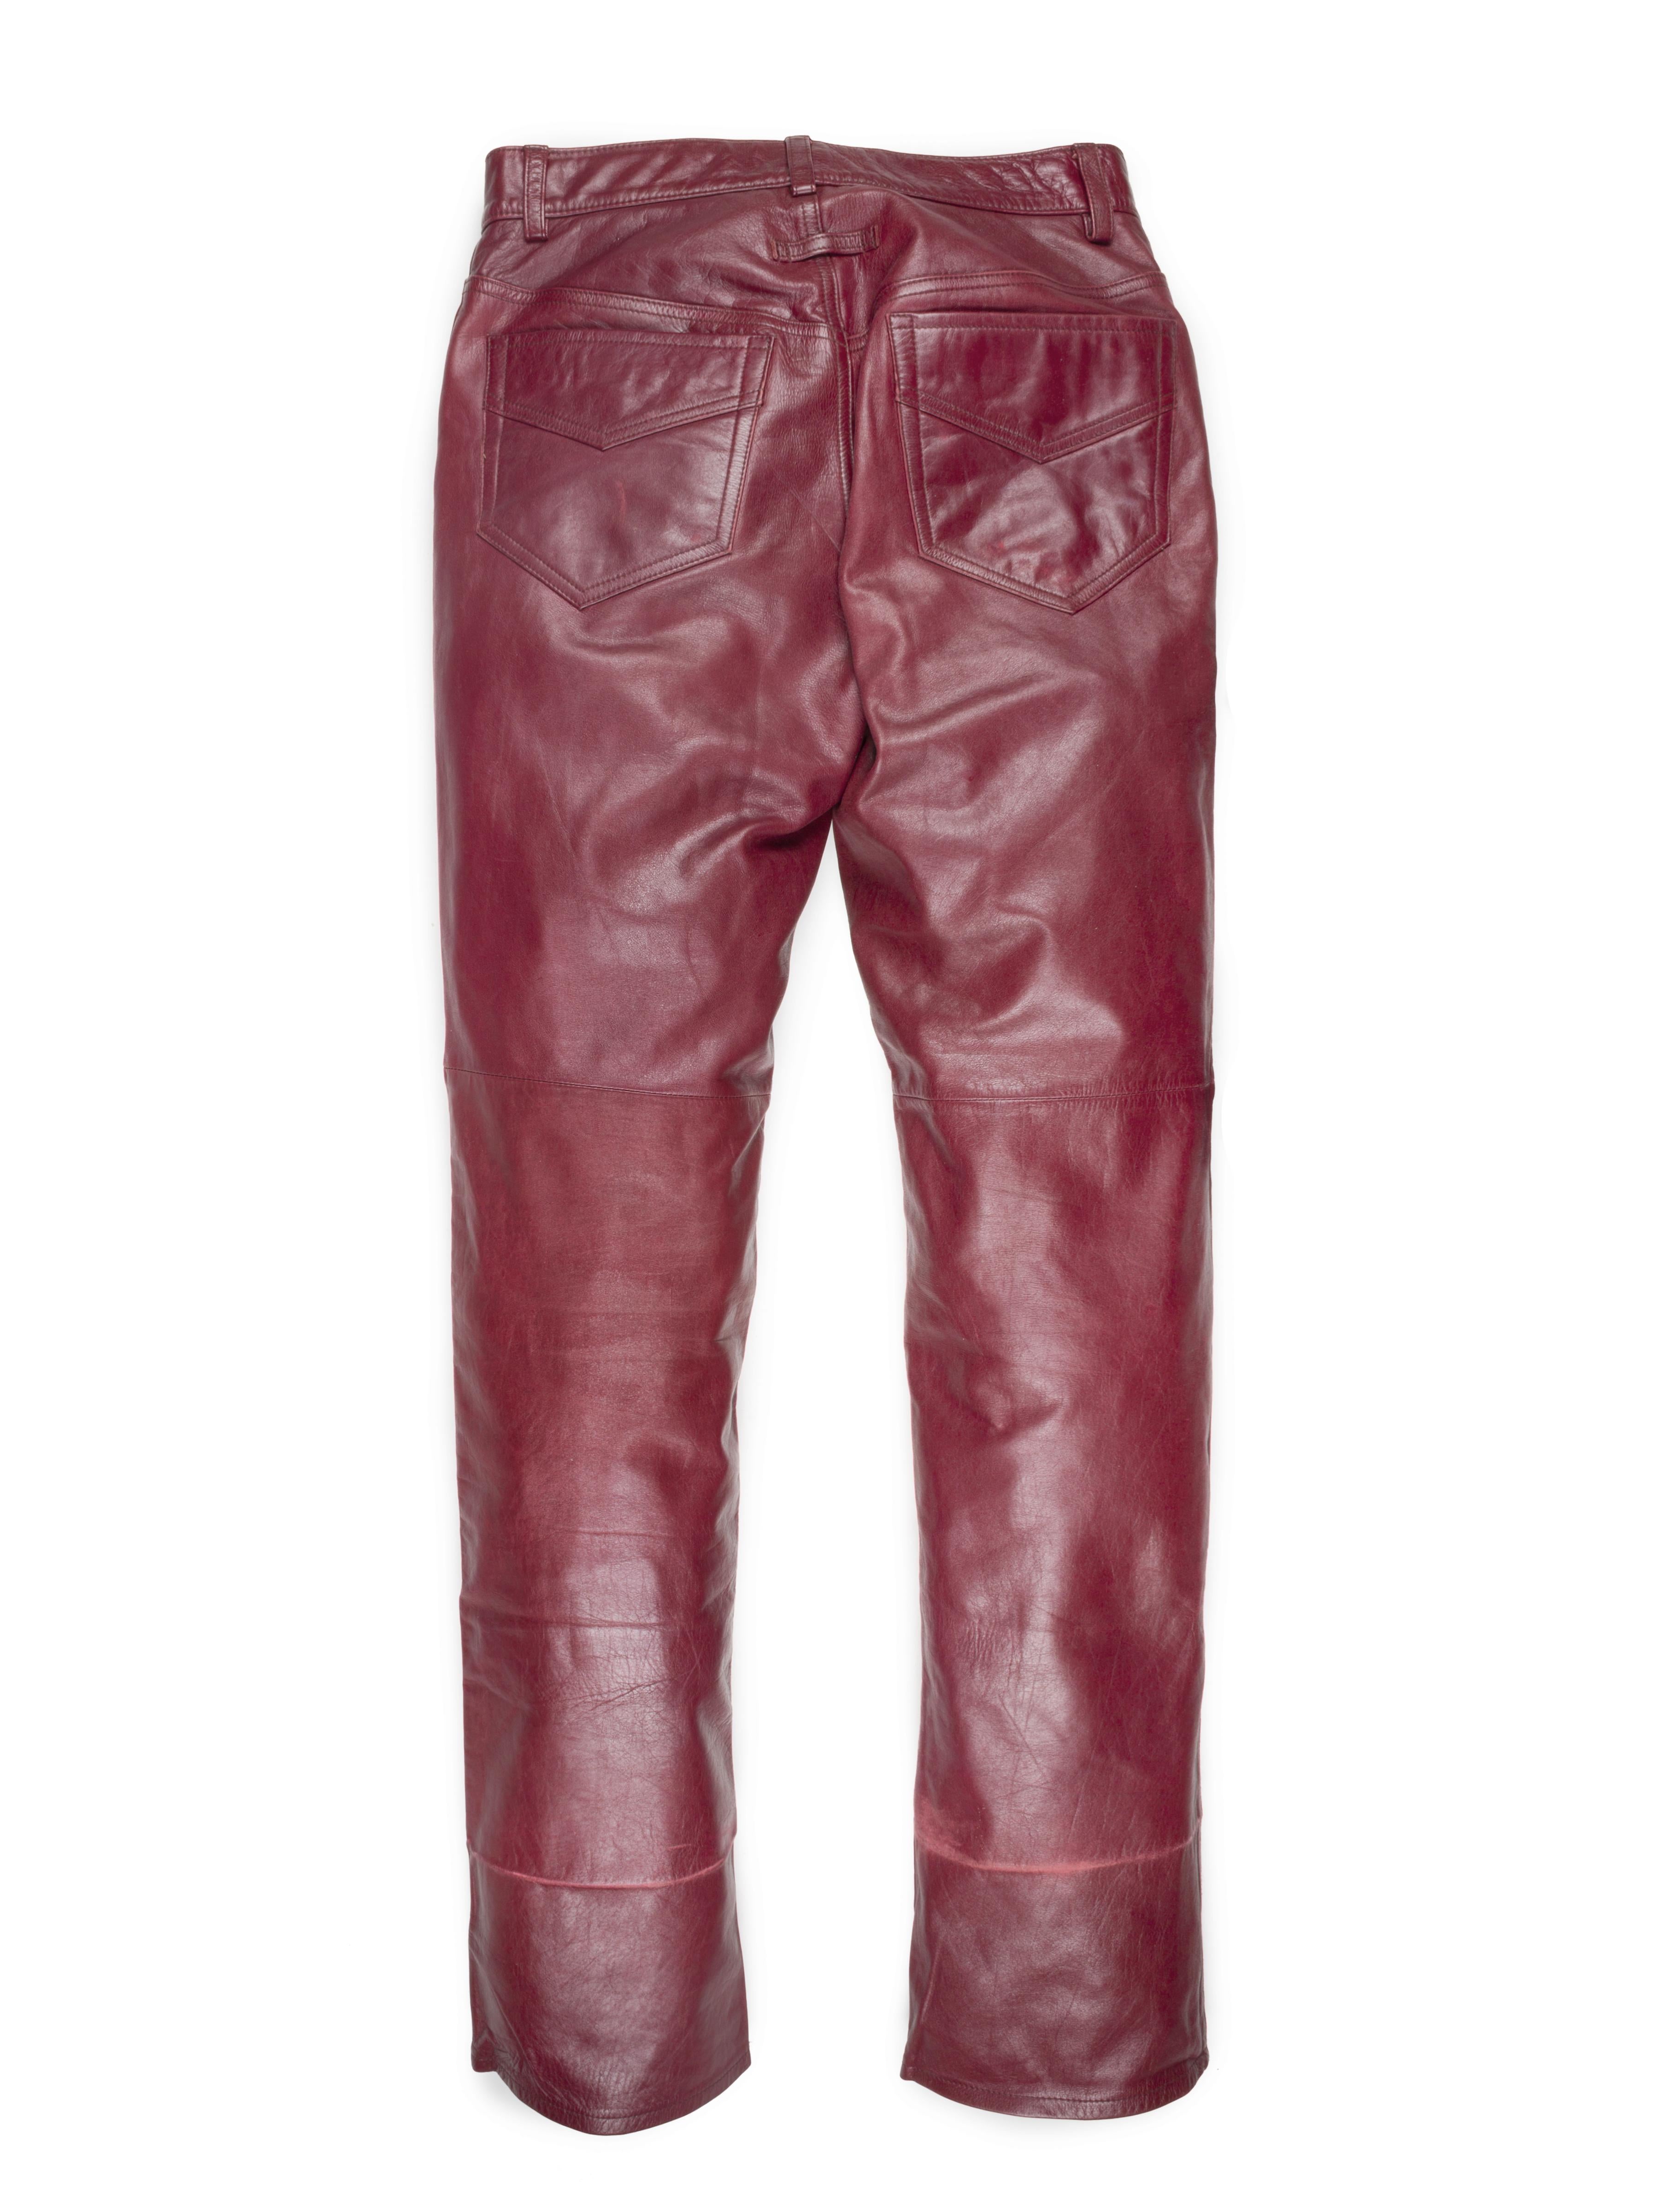 Jean Paul Gaultier Homme Objet Red Leather Pants at 1stDibs